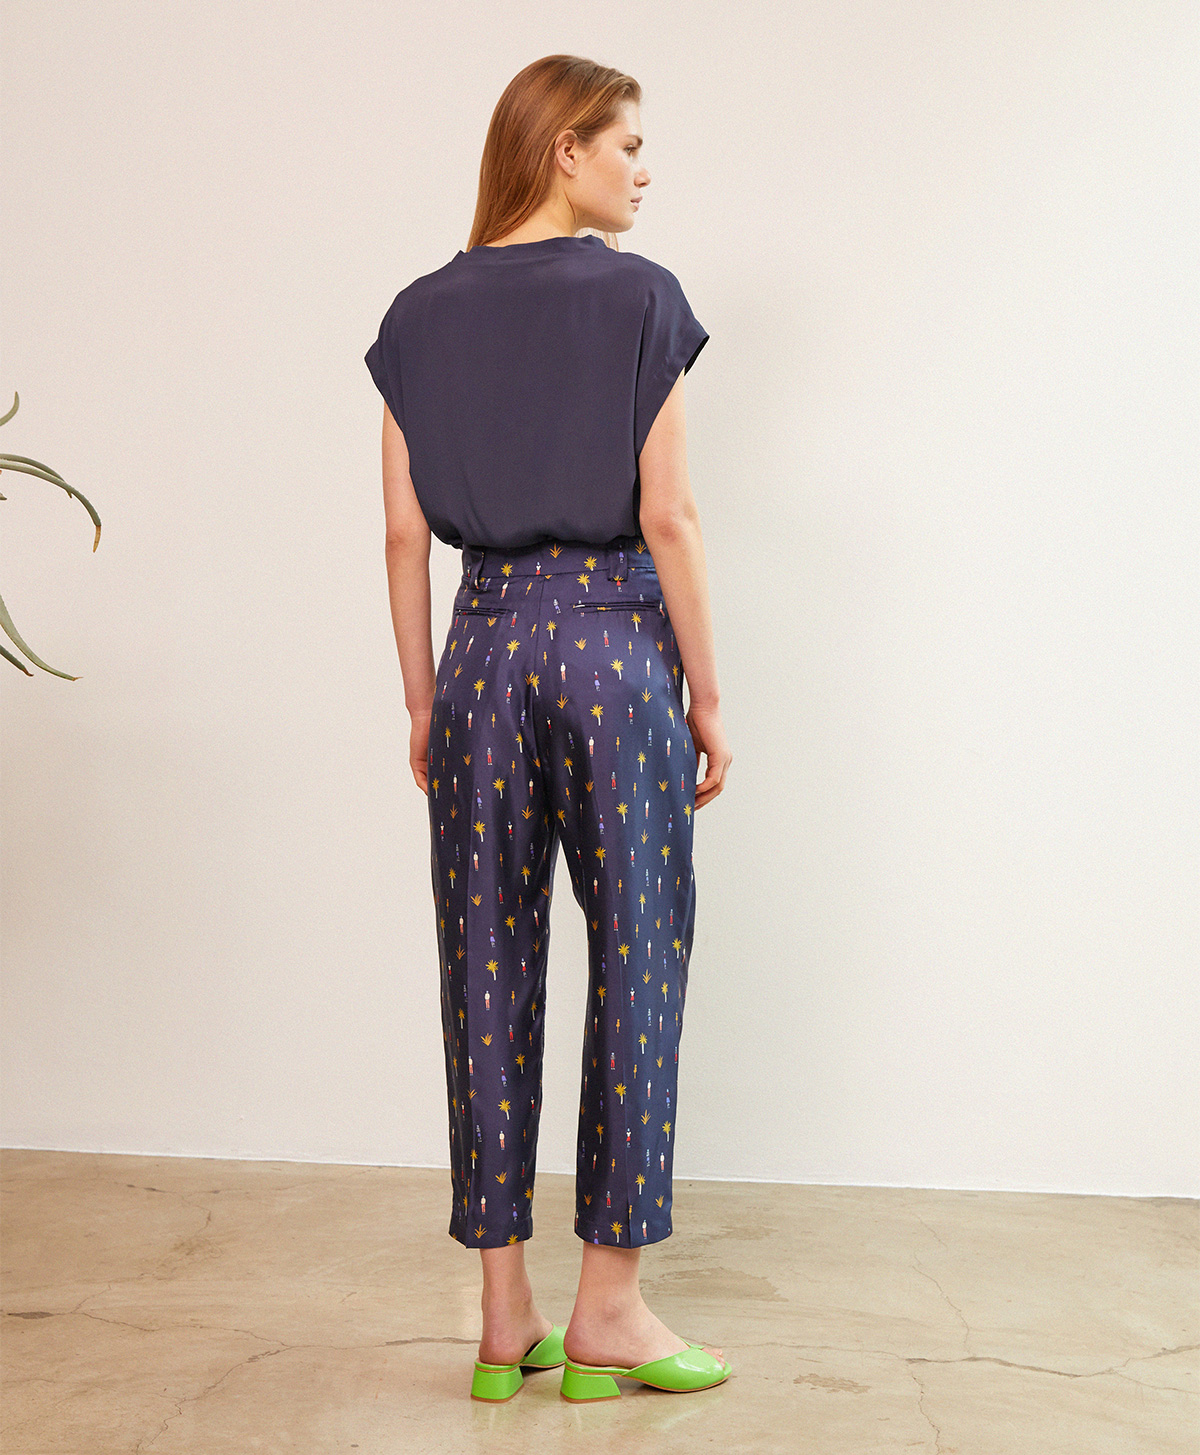 CREPUSCOLO PANTS IN PRINTED SILK TWILL - BLUE/RED - Momonì